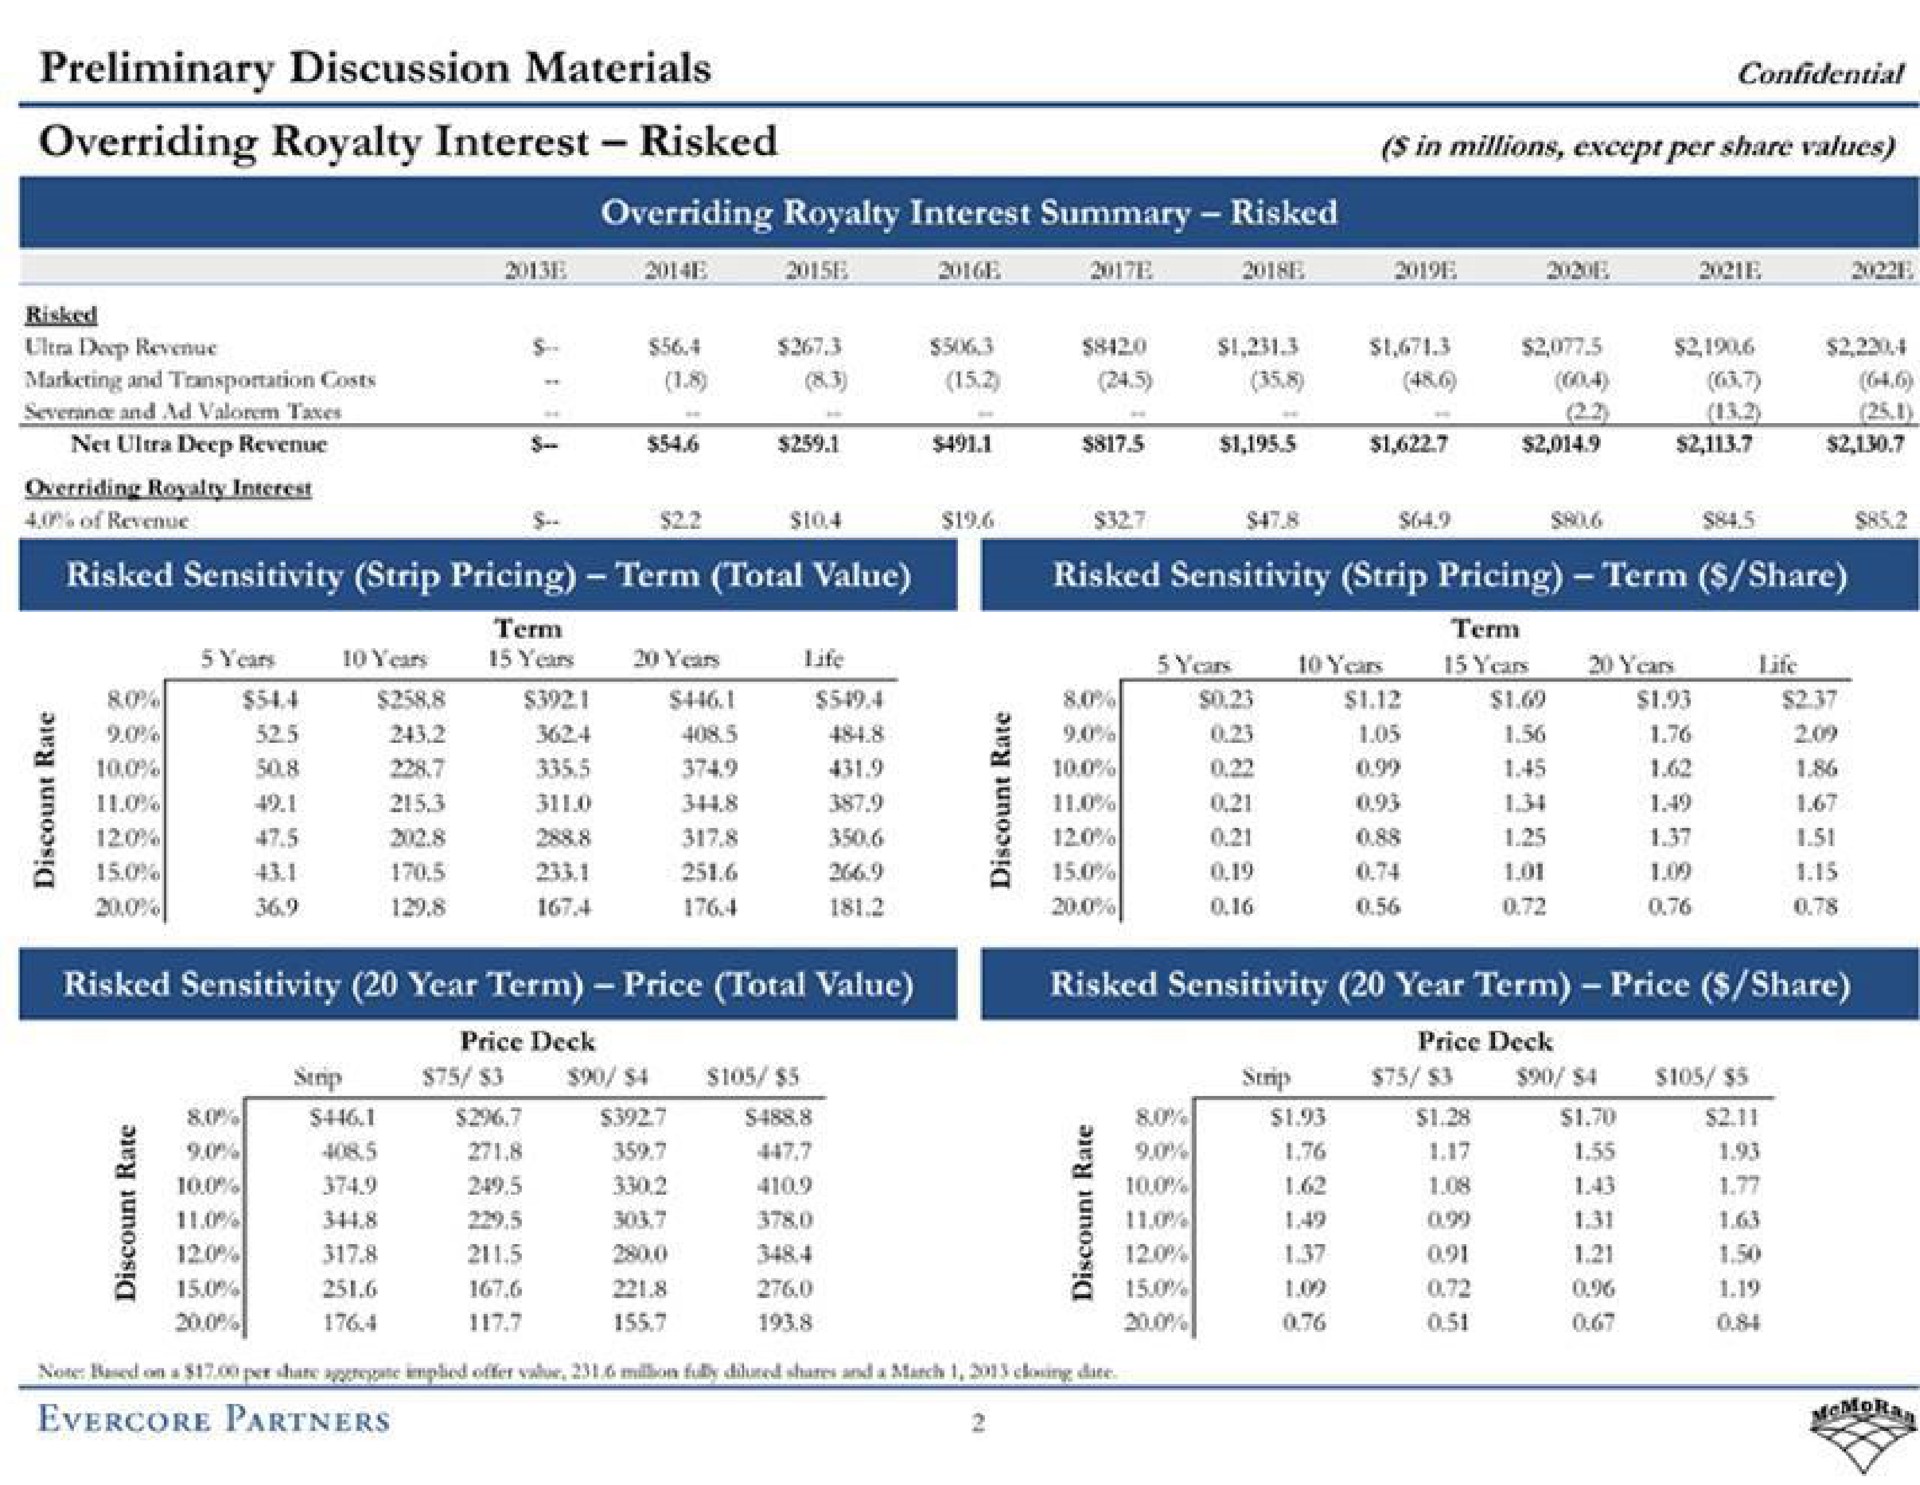 preliminary discussion materials overriding royalty interest risked confidential in millions except per share values risked sensitivity strip pricing term share to partners | Evercore